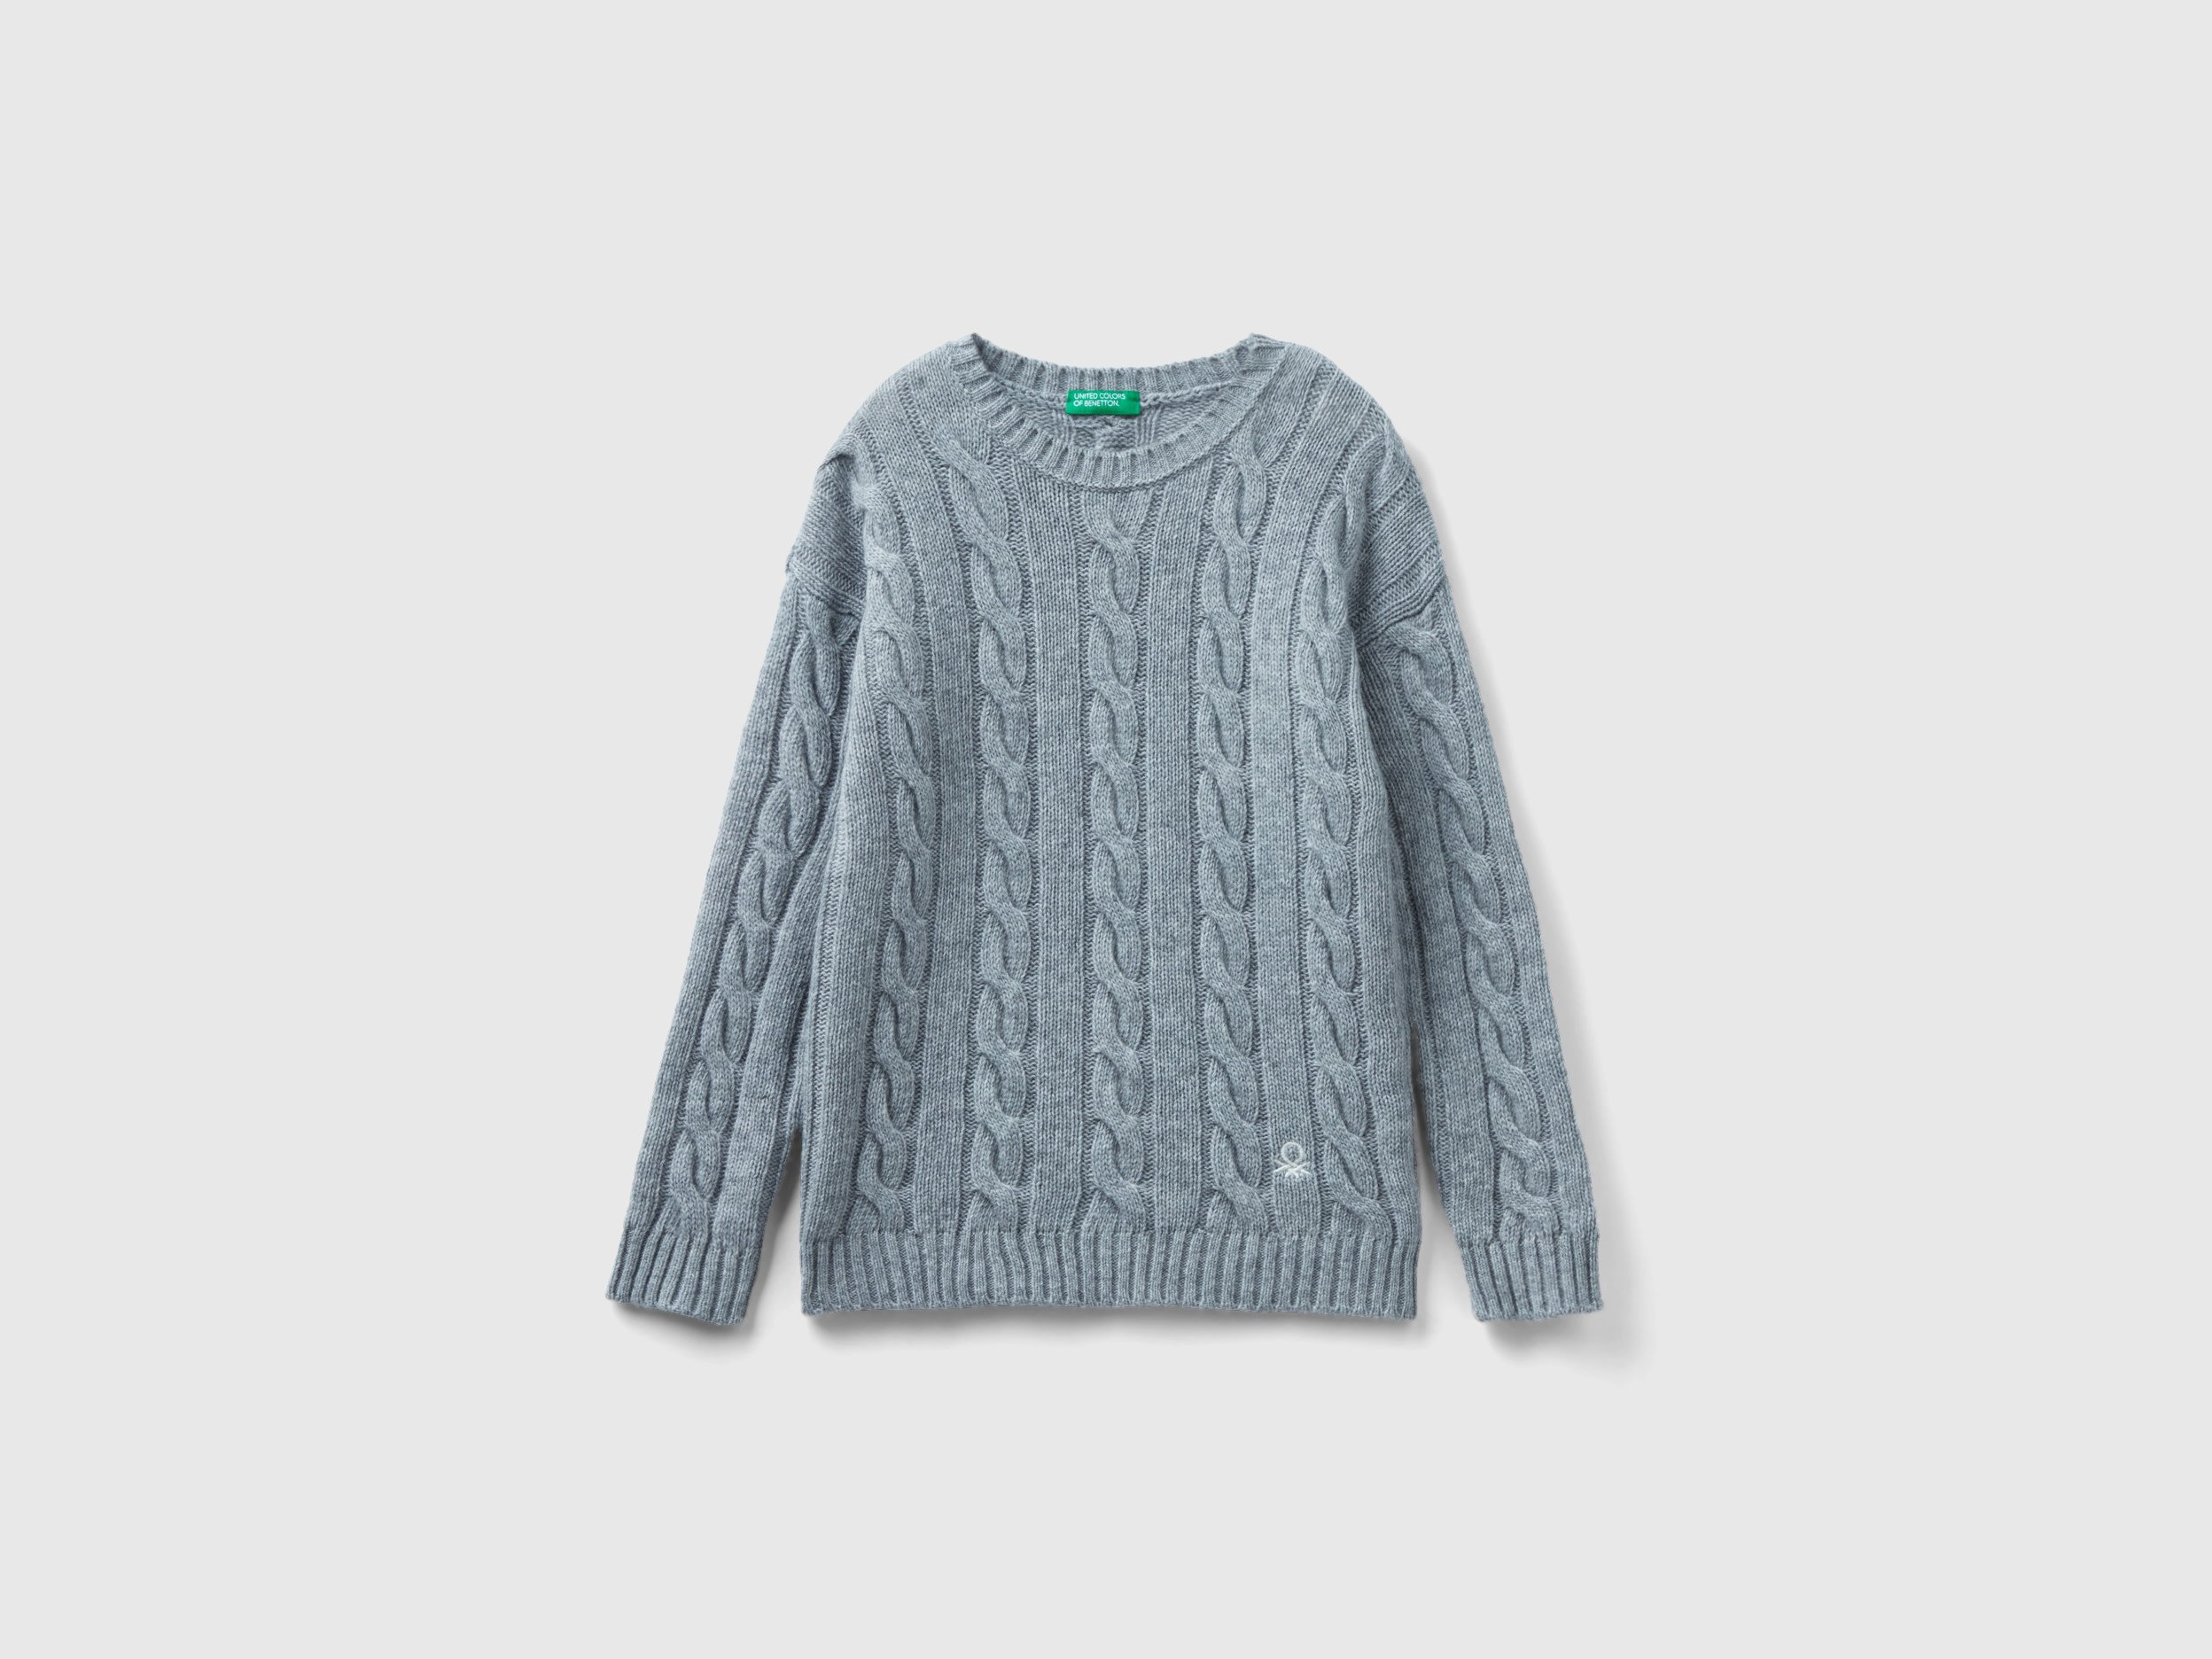 Benetton, Cable Knit Sweater In Wool Blend, size M, Gray, Kids